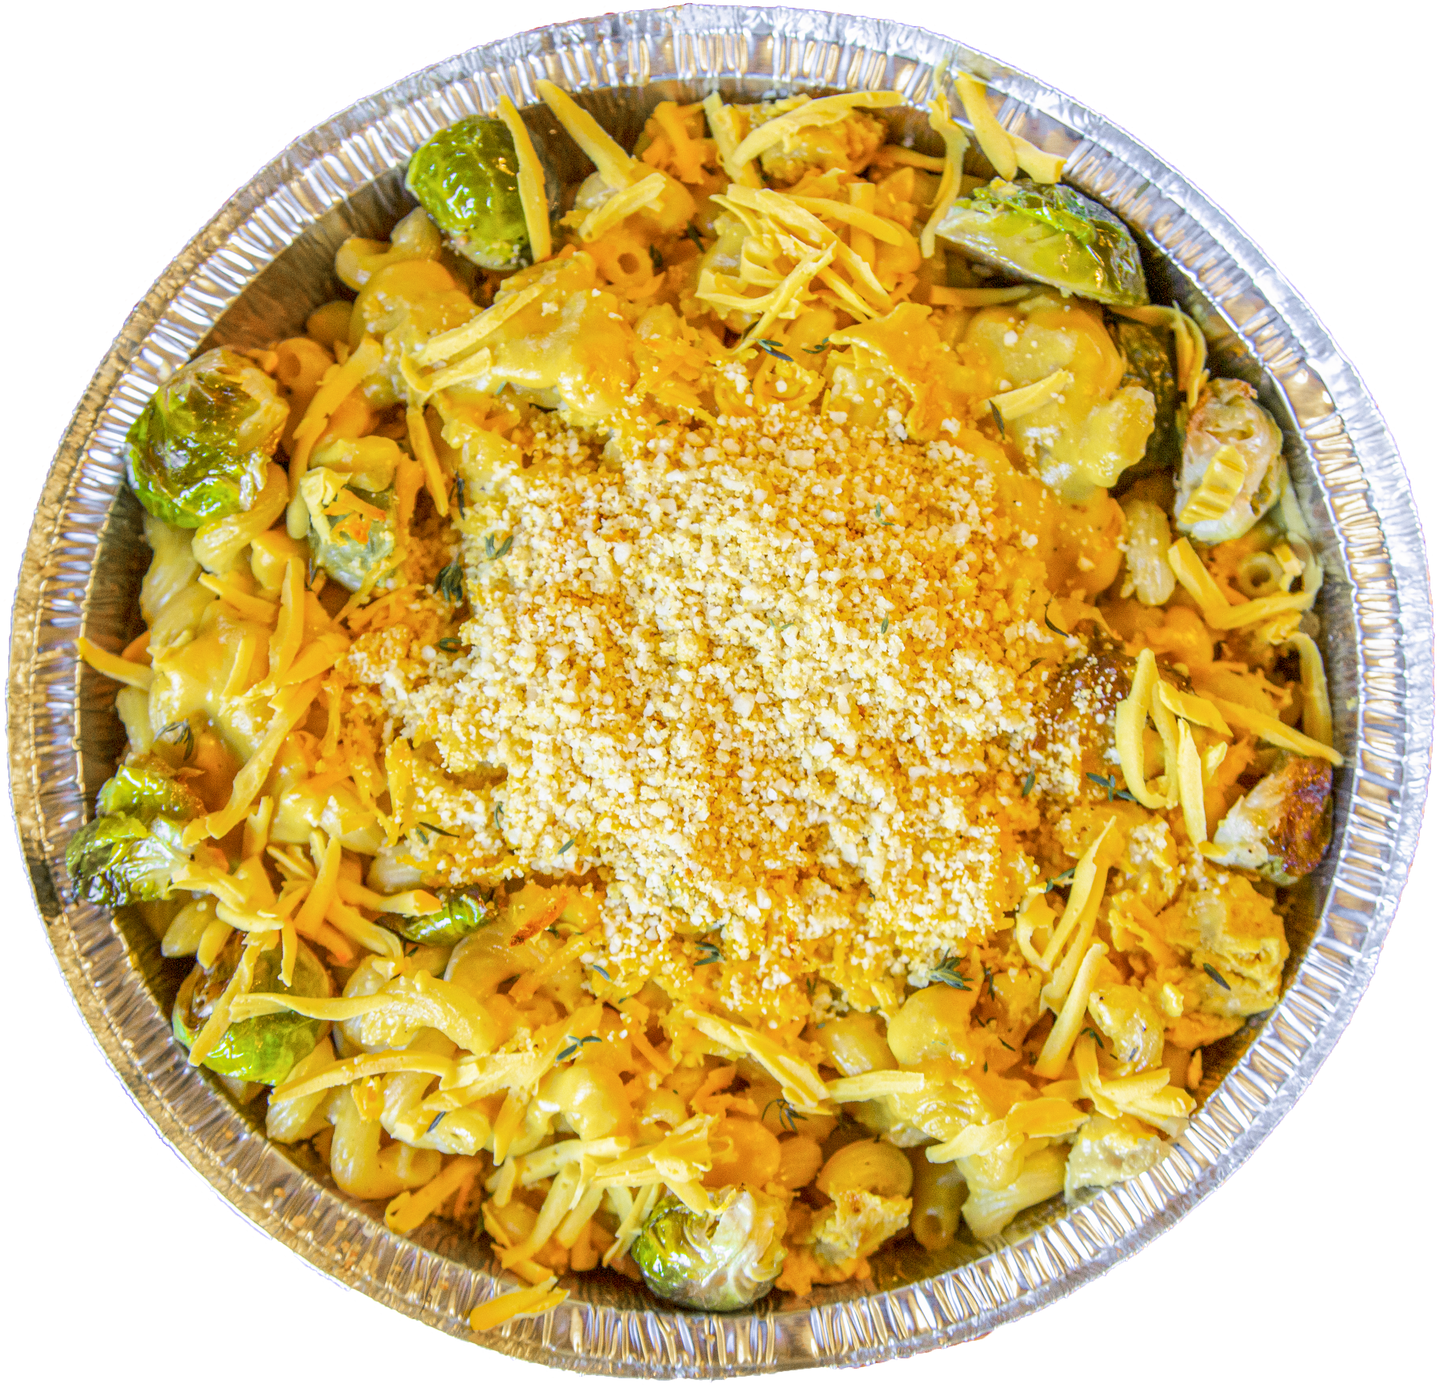 vegan Thanksgiving mac and cheese with brussels sprouts in Des Moines, Iowa